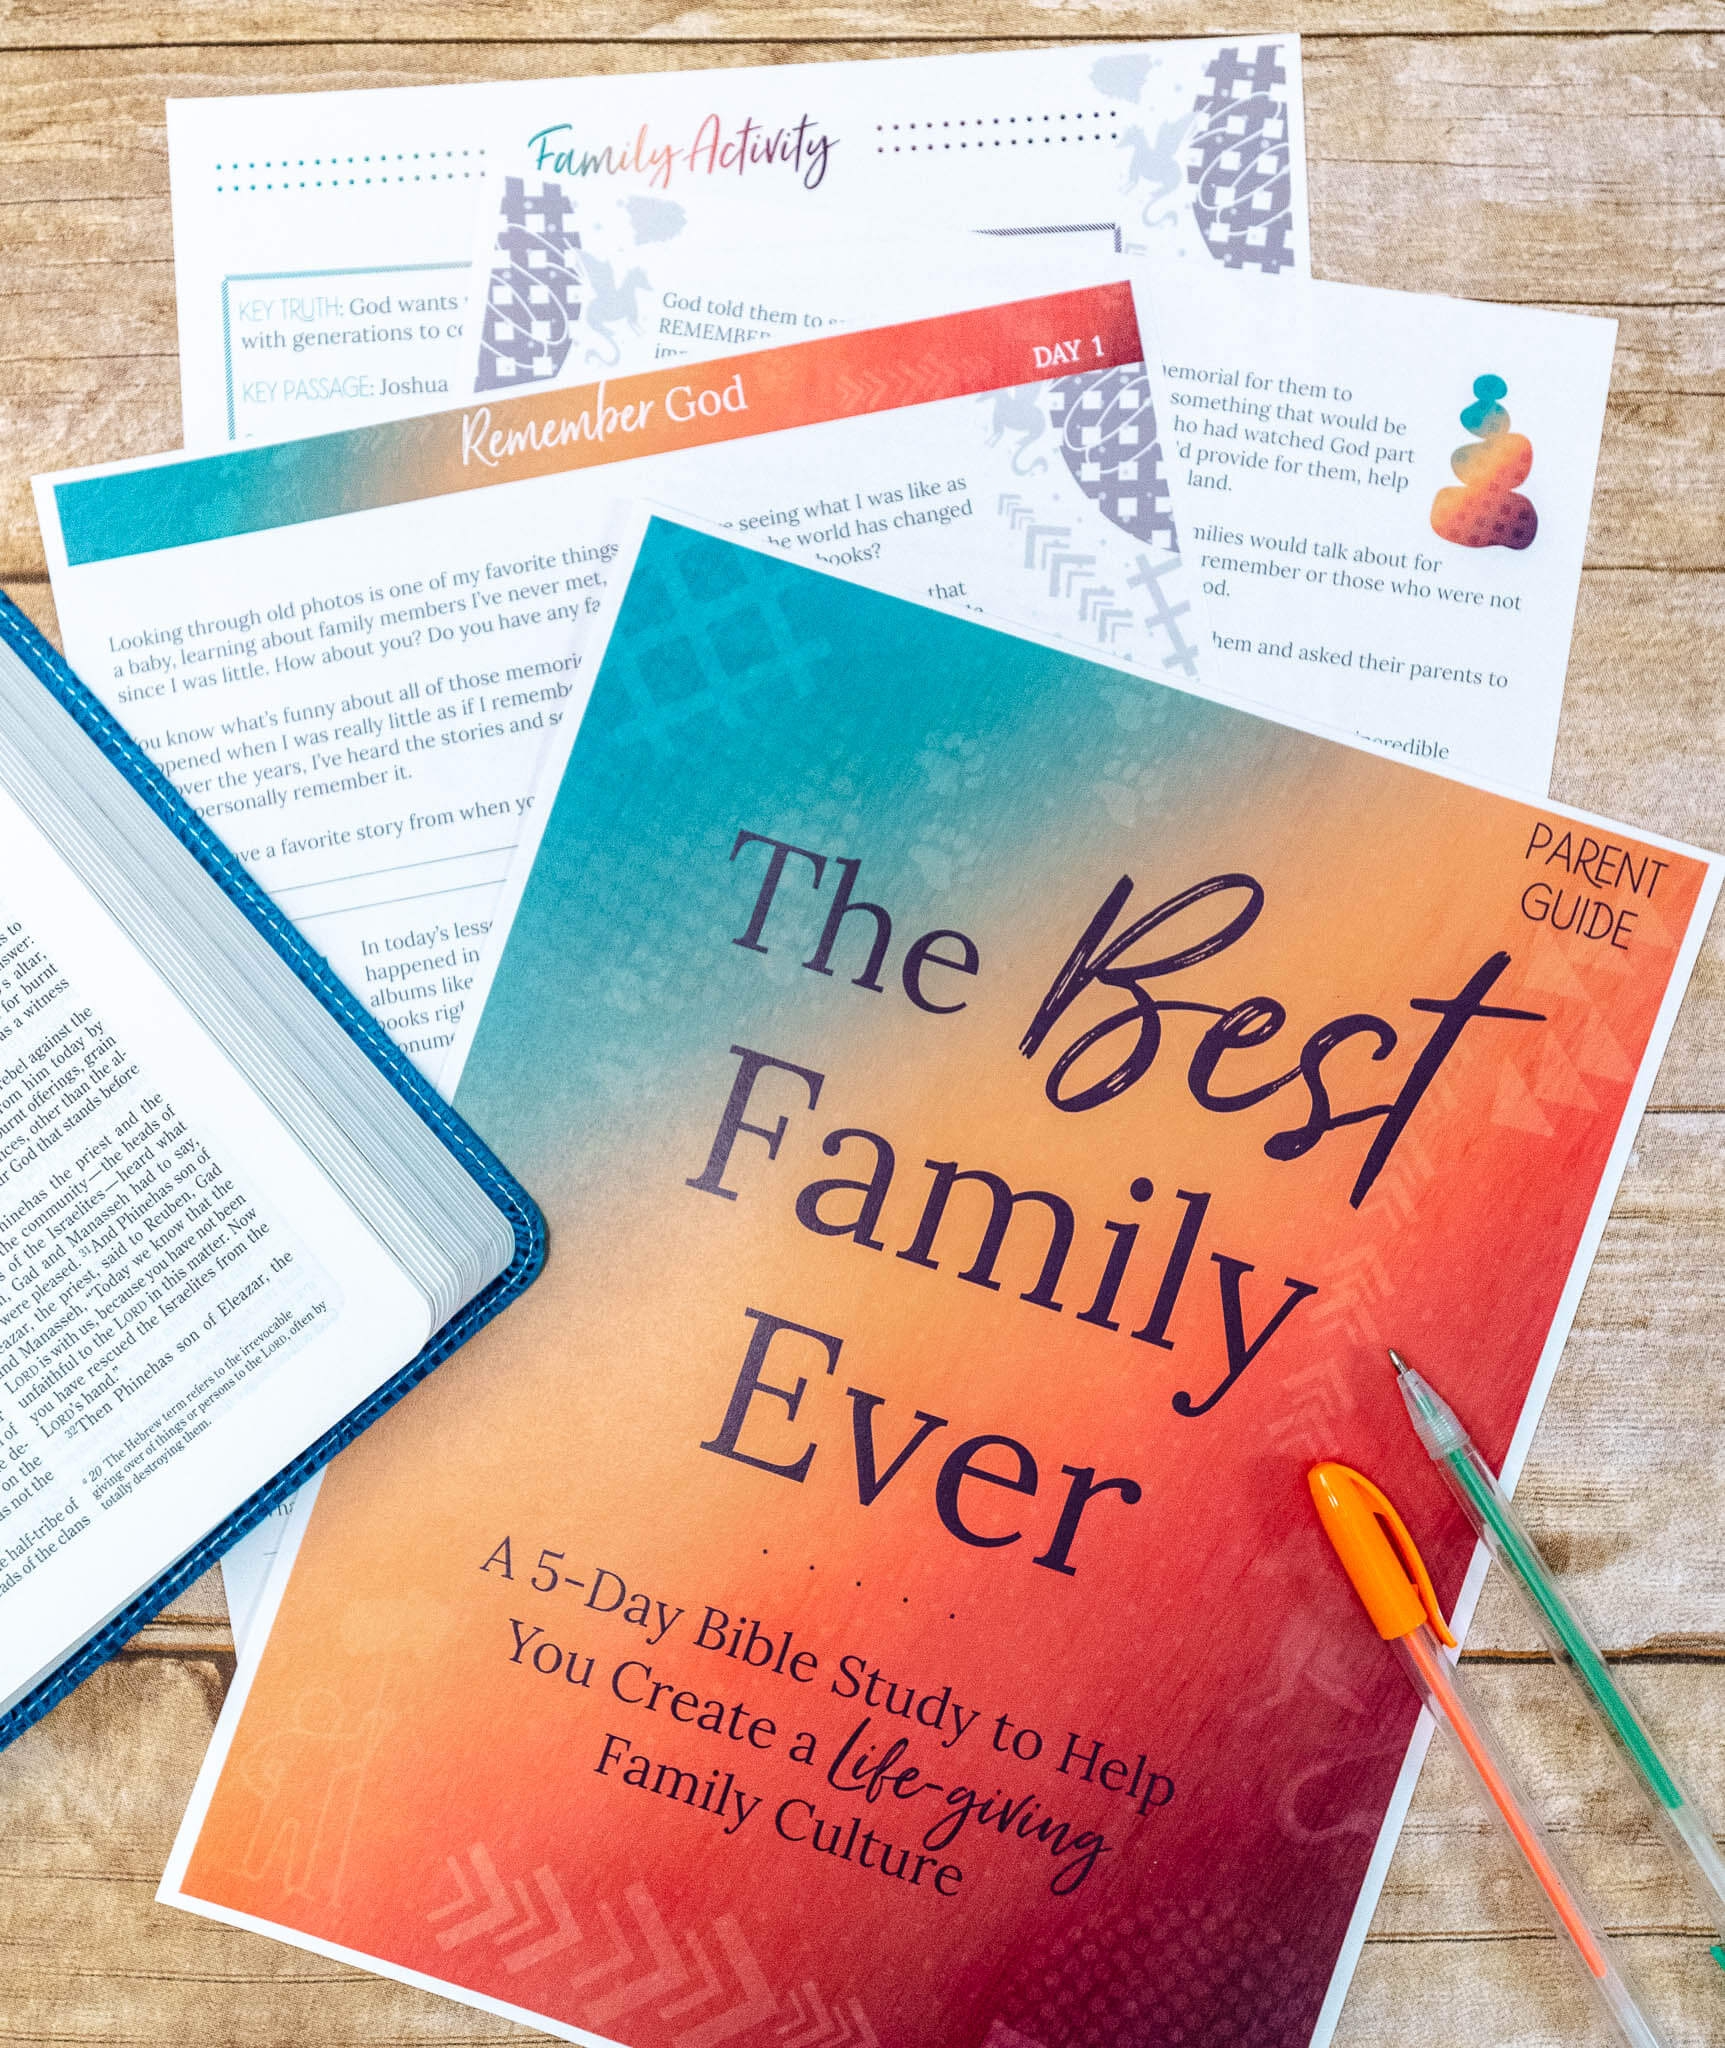 FREE Family Life Bible Study Creating A Life Giving Family Culture